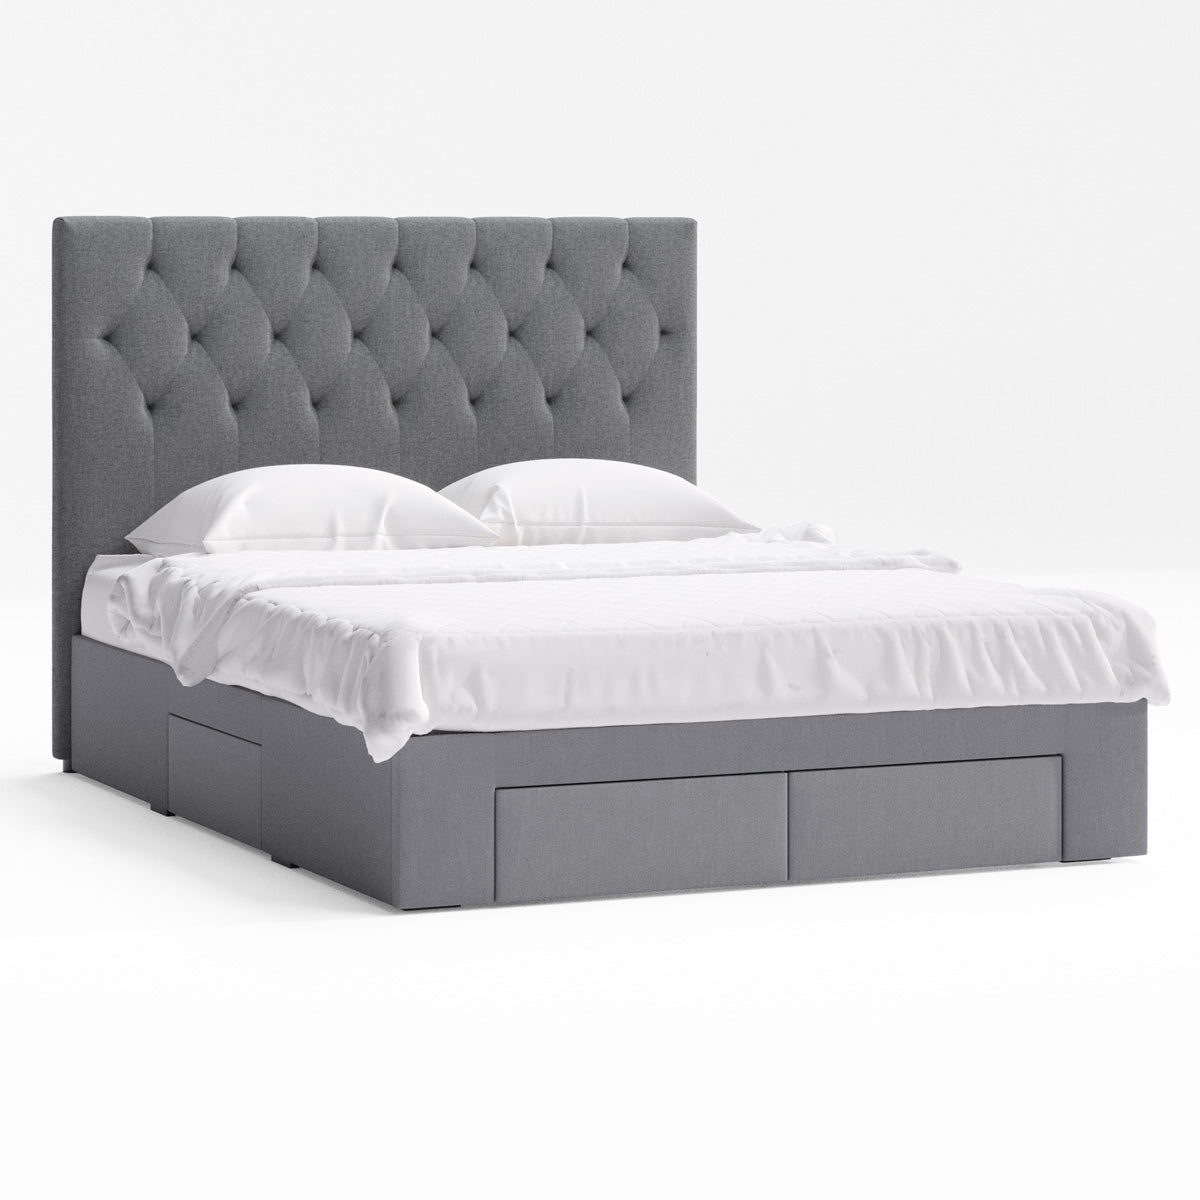 Fenwick Bed Frame with Four Storage Drawers (Charcoal Fabric)